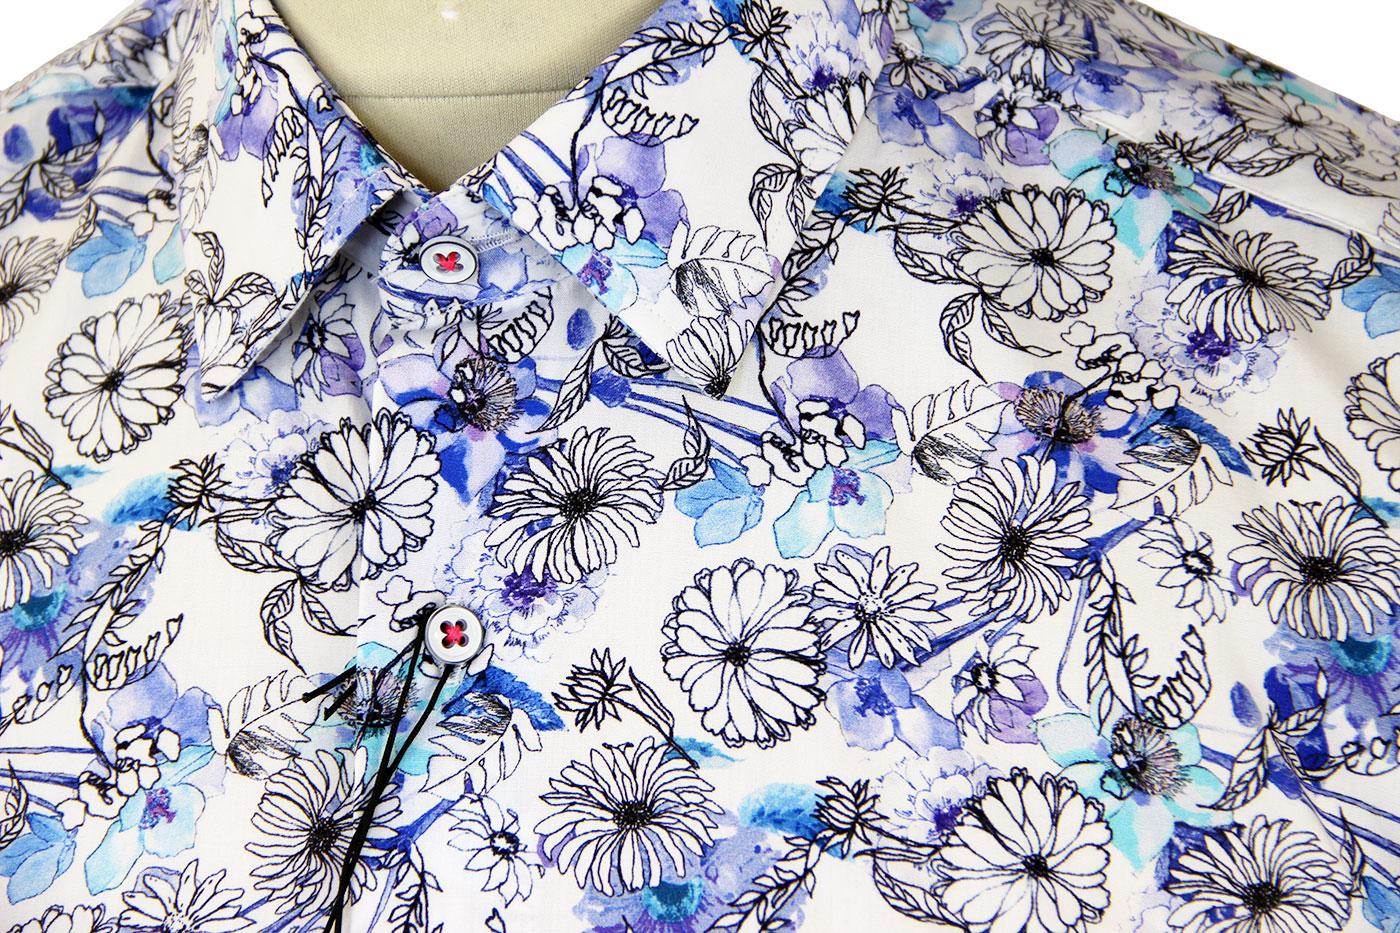 1 LIKE NO OTHER Hand Drawn Floral Retro 60s Mod Shirt in White